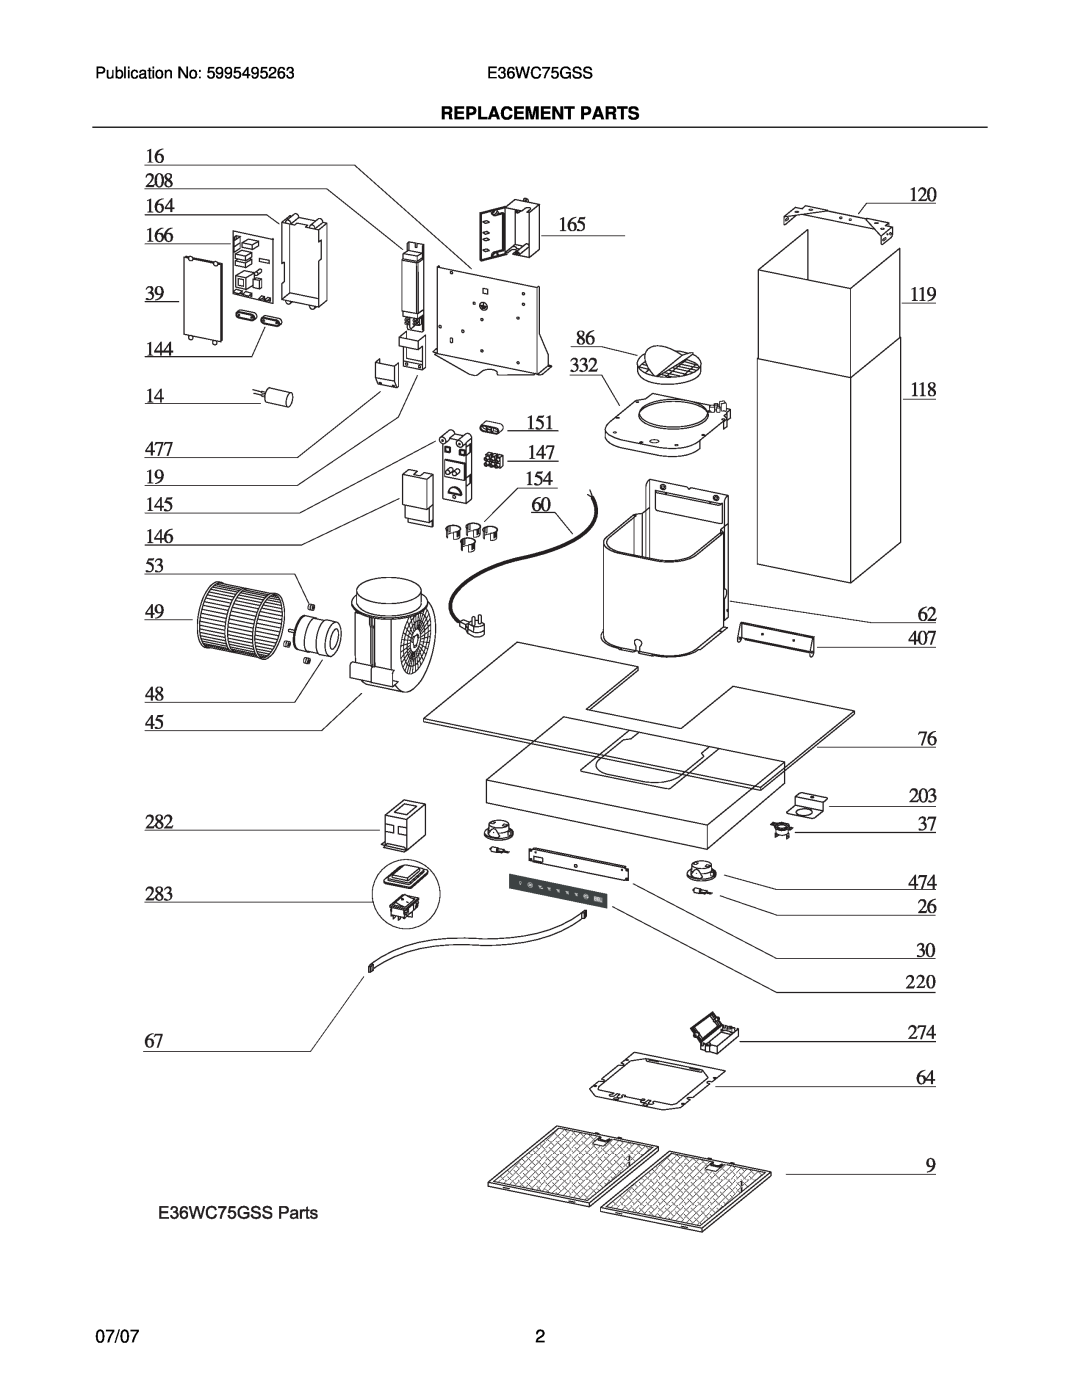 Electrolux installation instructions Replacement Parts, 07/07, E36WC75GSS 